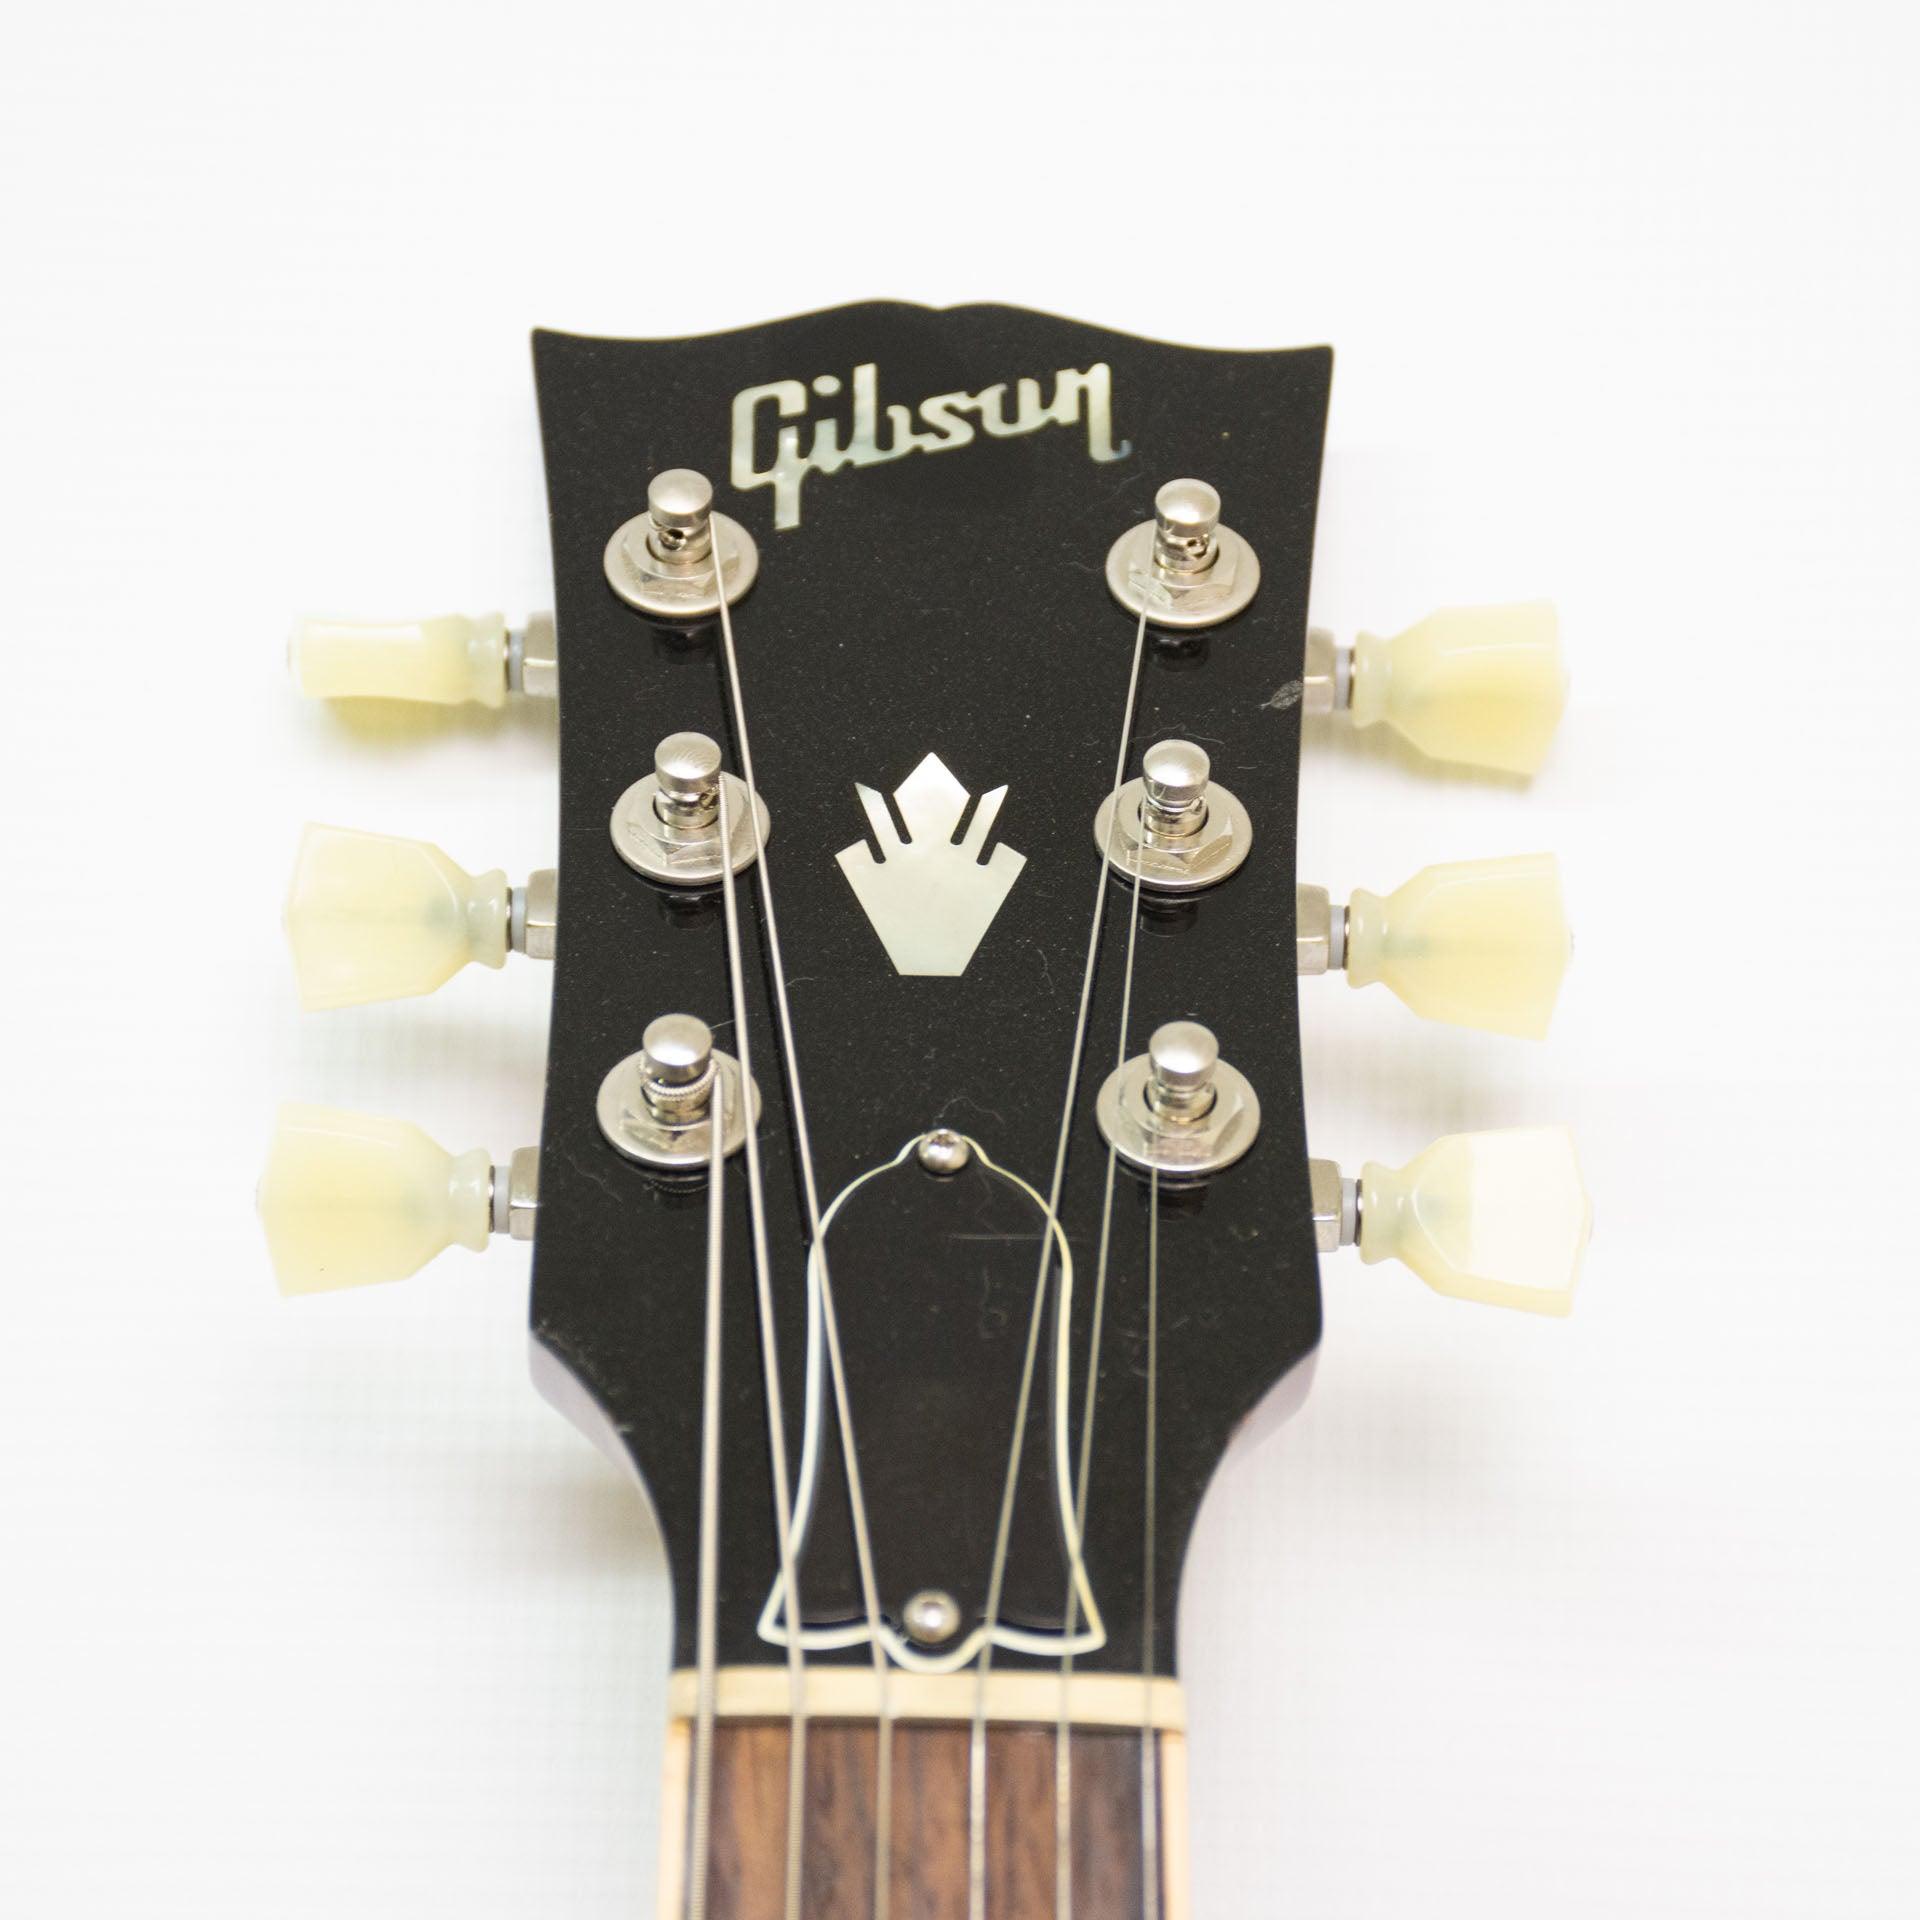 Gibson SG Red 1961 Electric Guitar - ipawnishop.com